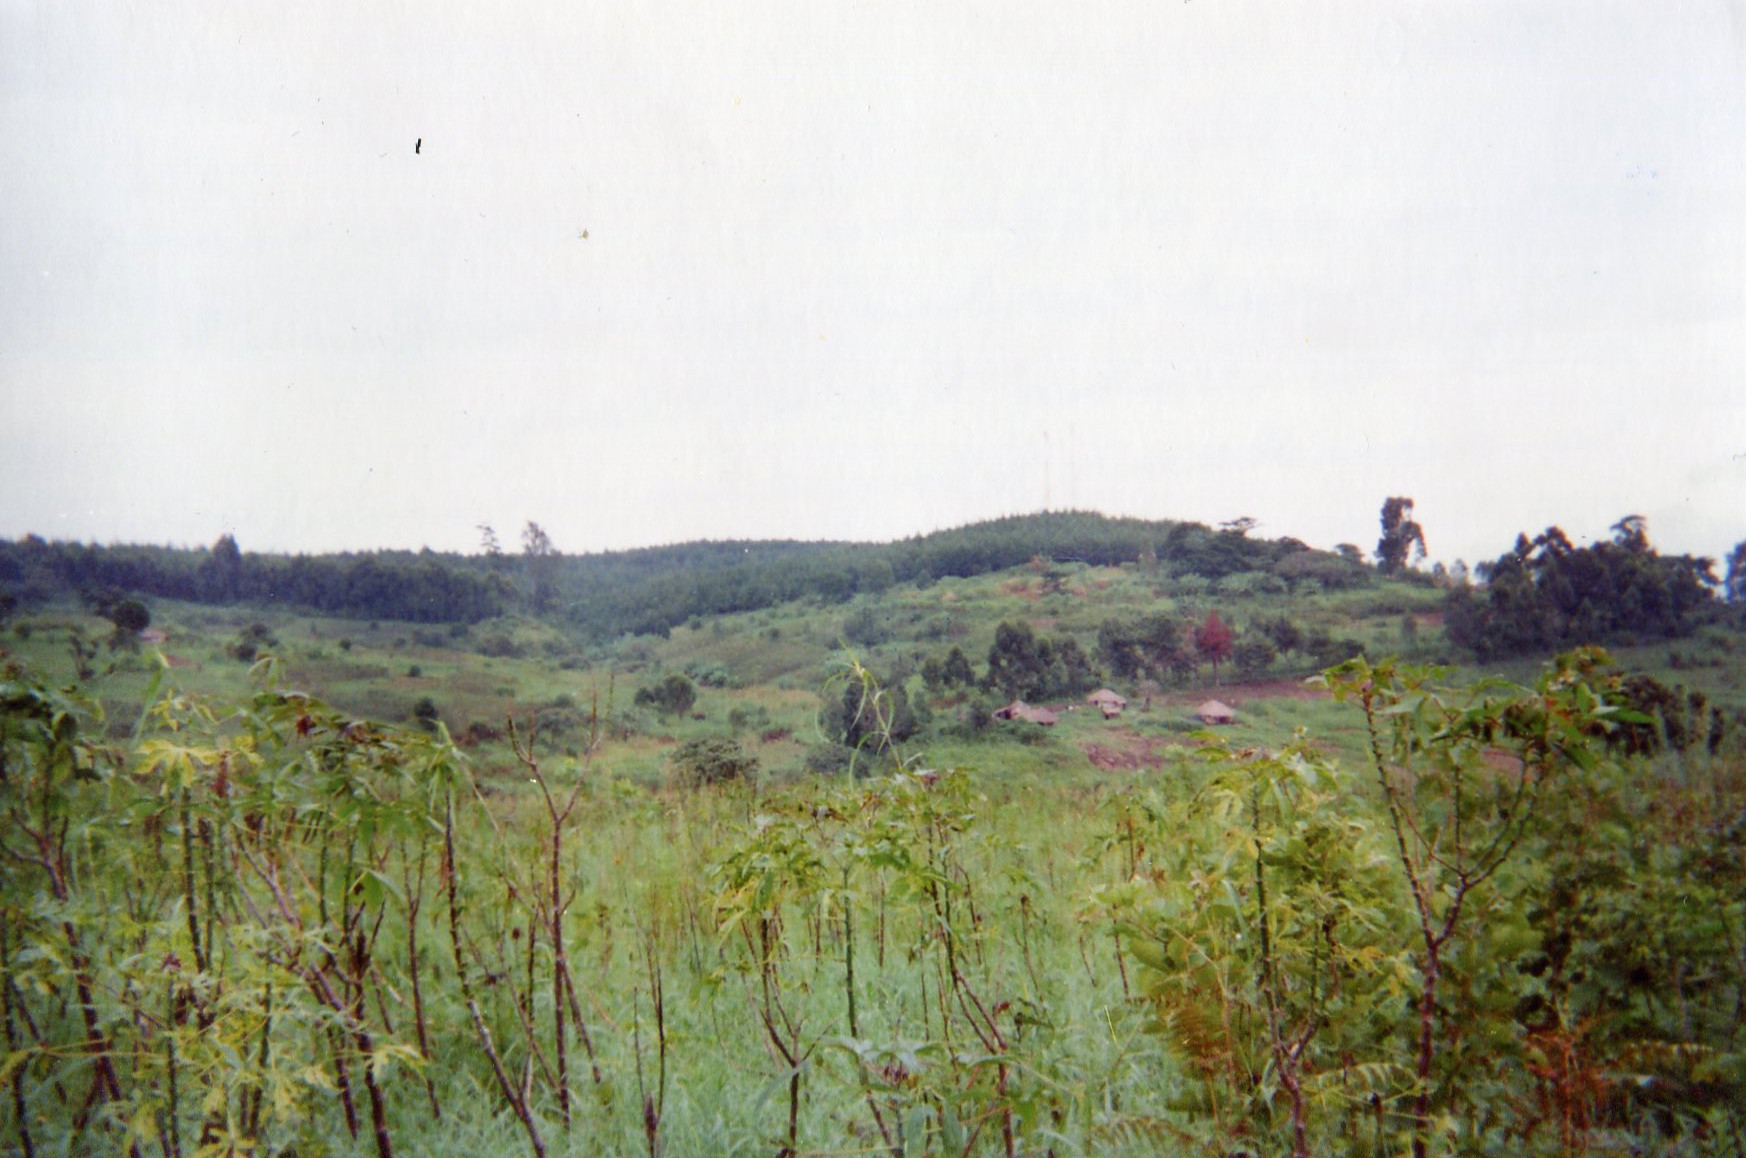  This landscape recalls the entry of armed groups who hid themselves in this forest before attacking the village. 